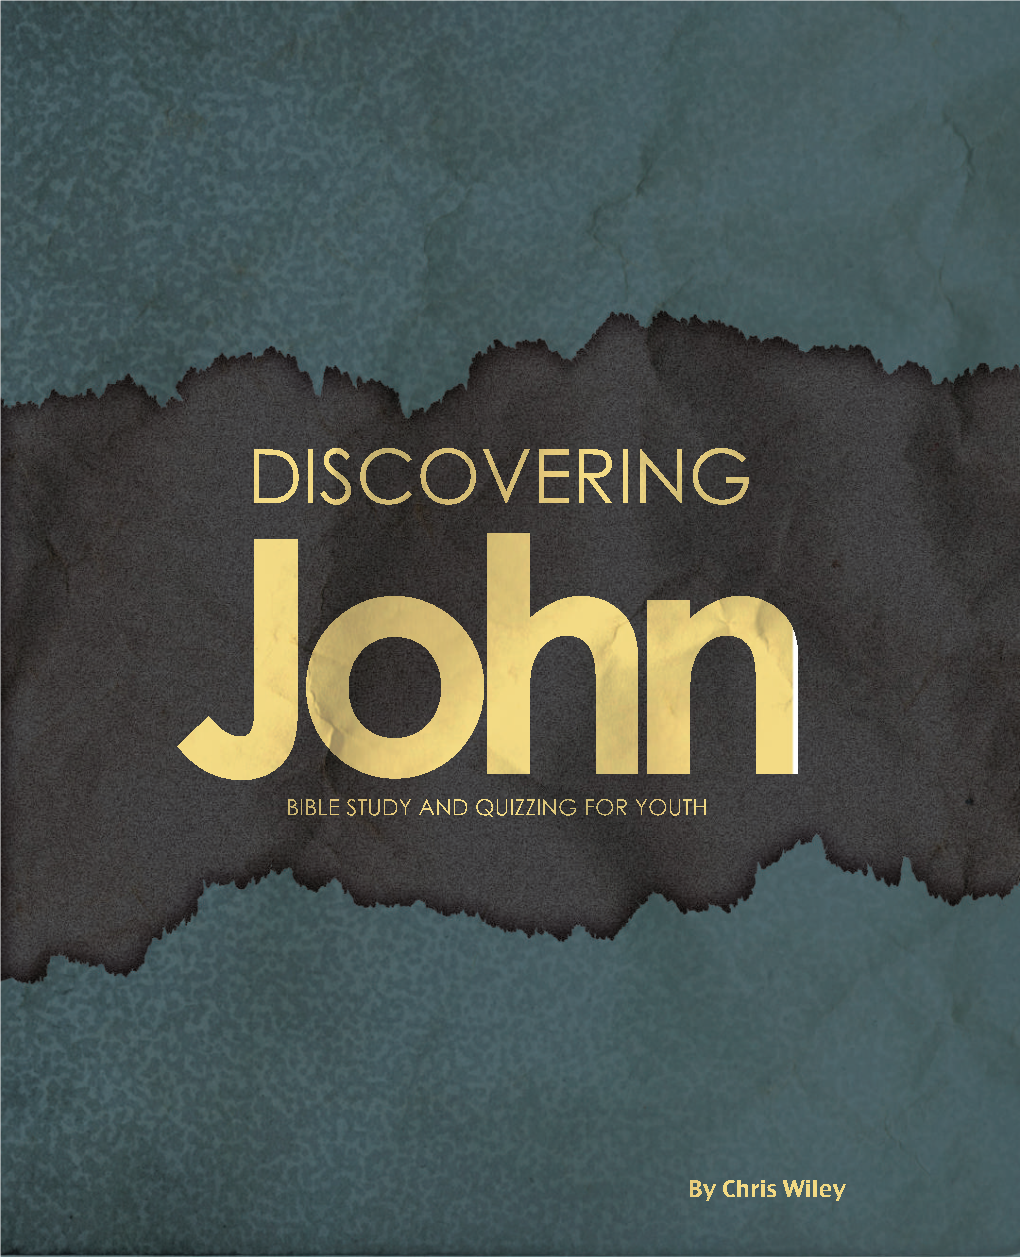 Discovering John: Bible Study and Quizzing for Youth